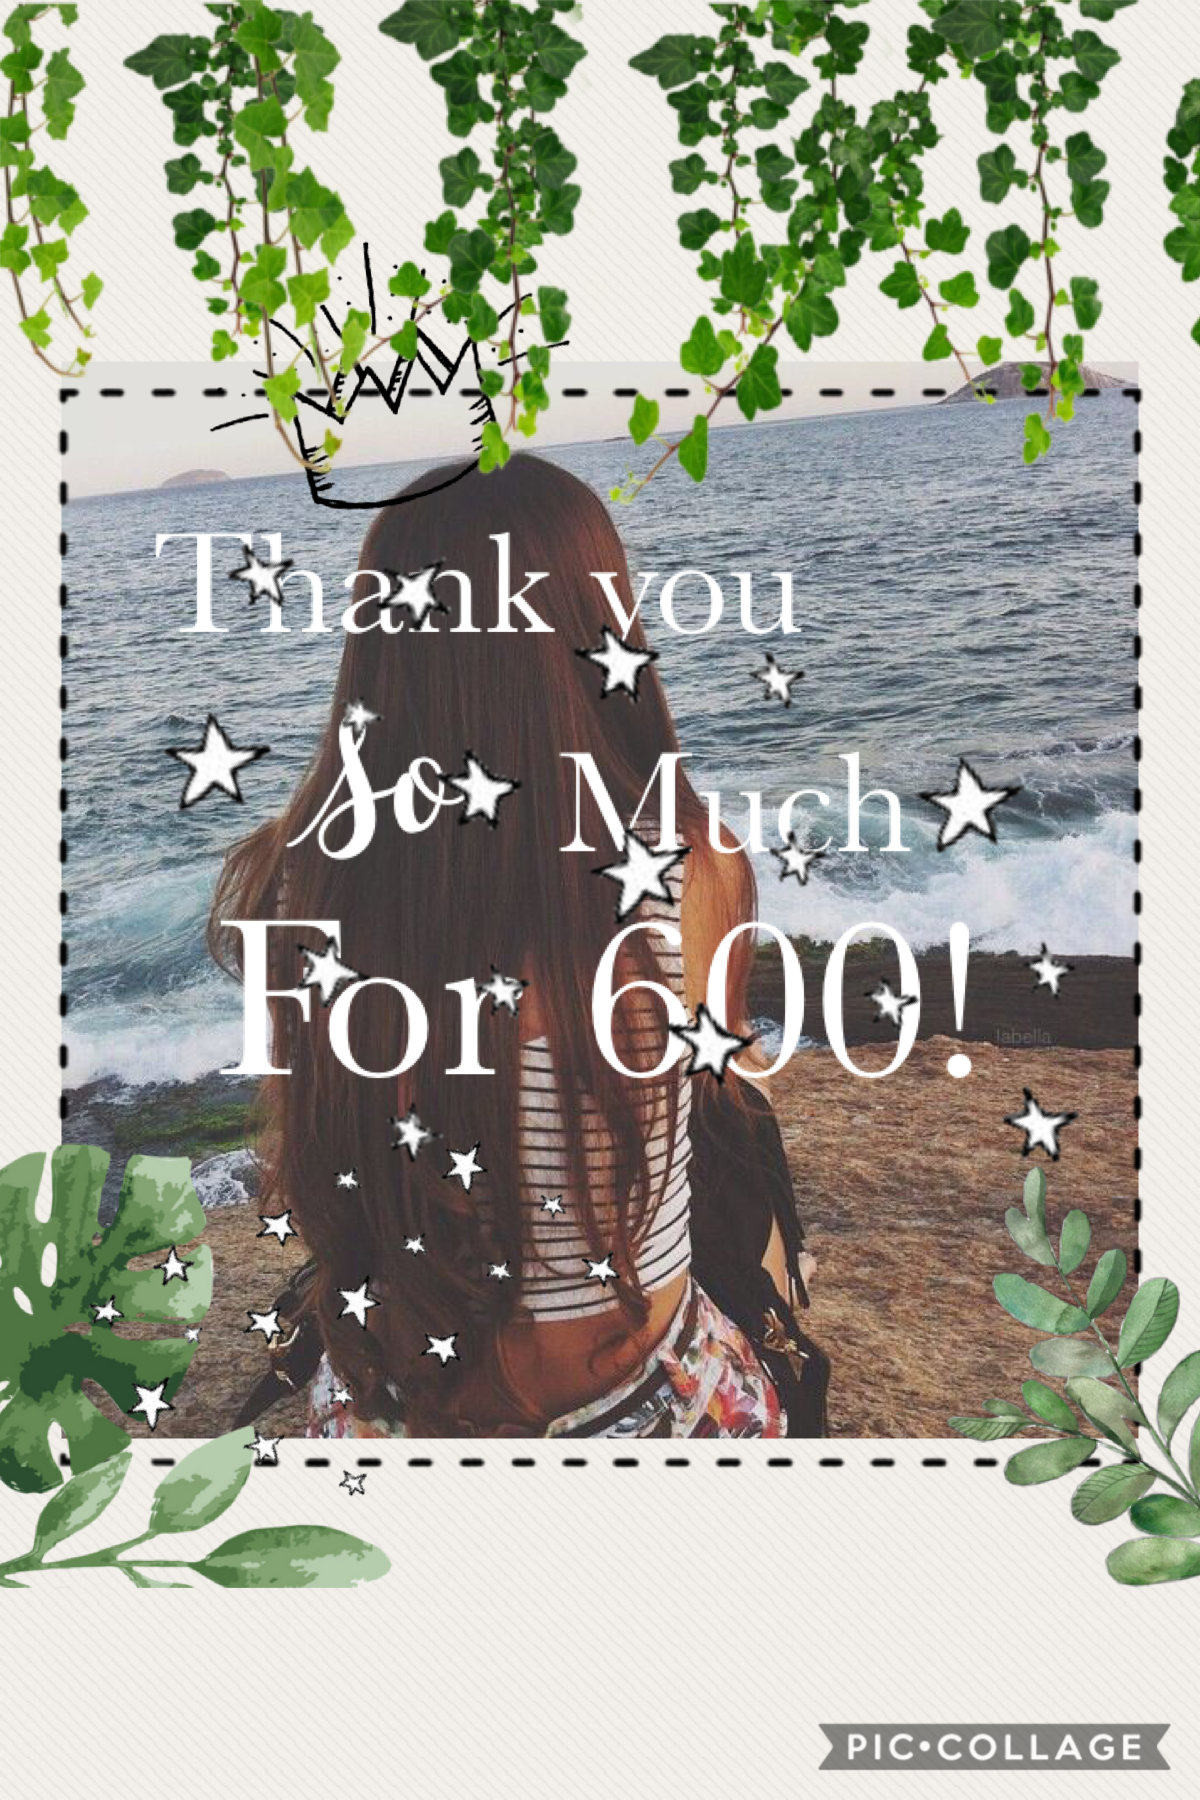 🌱 Tap 🌱 
Yay guys! We did it! Thank you so much for 600 followers!💗💗💗💗💗💗💗💗love y’all!!